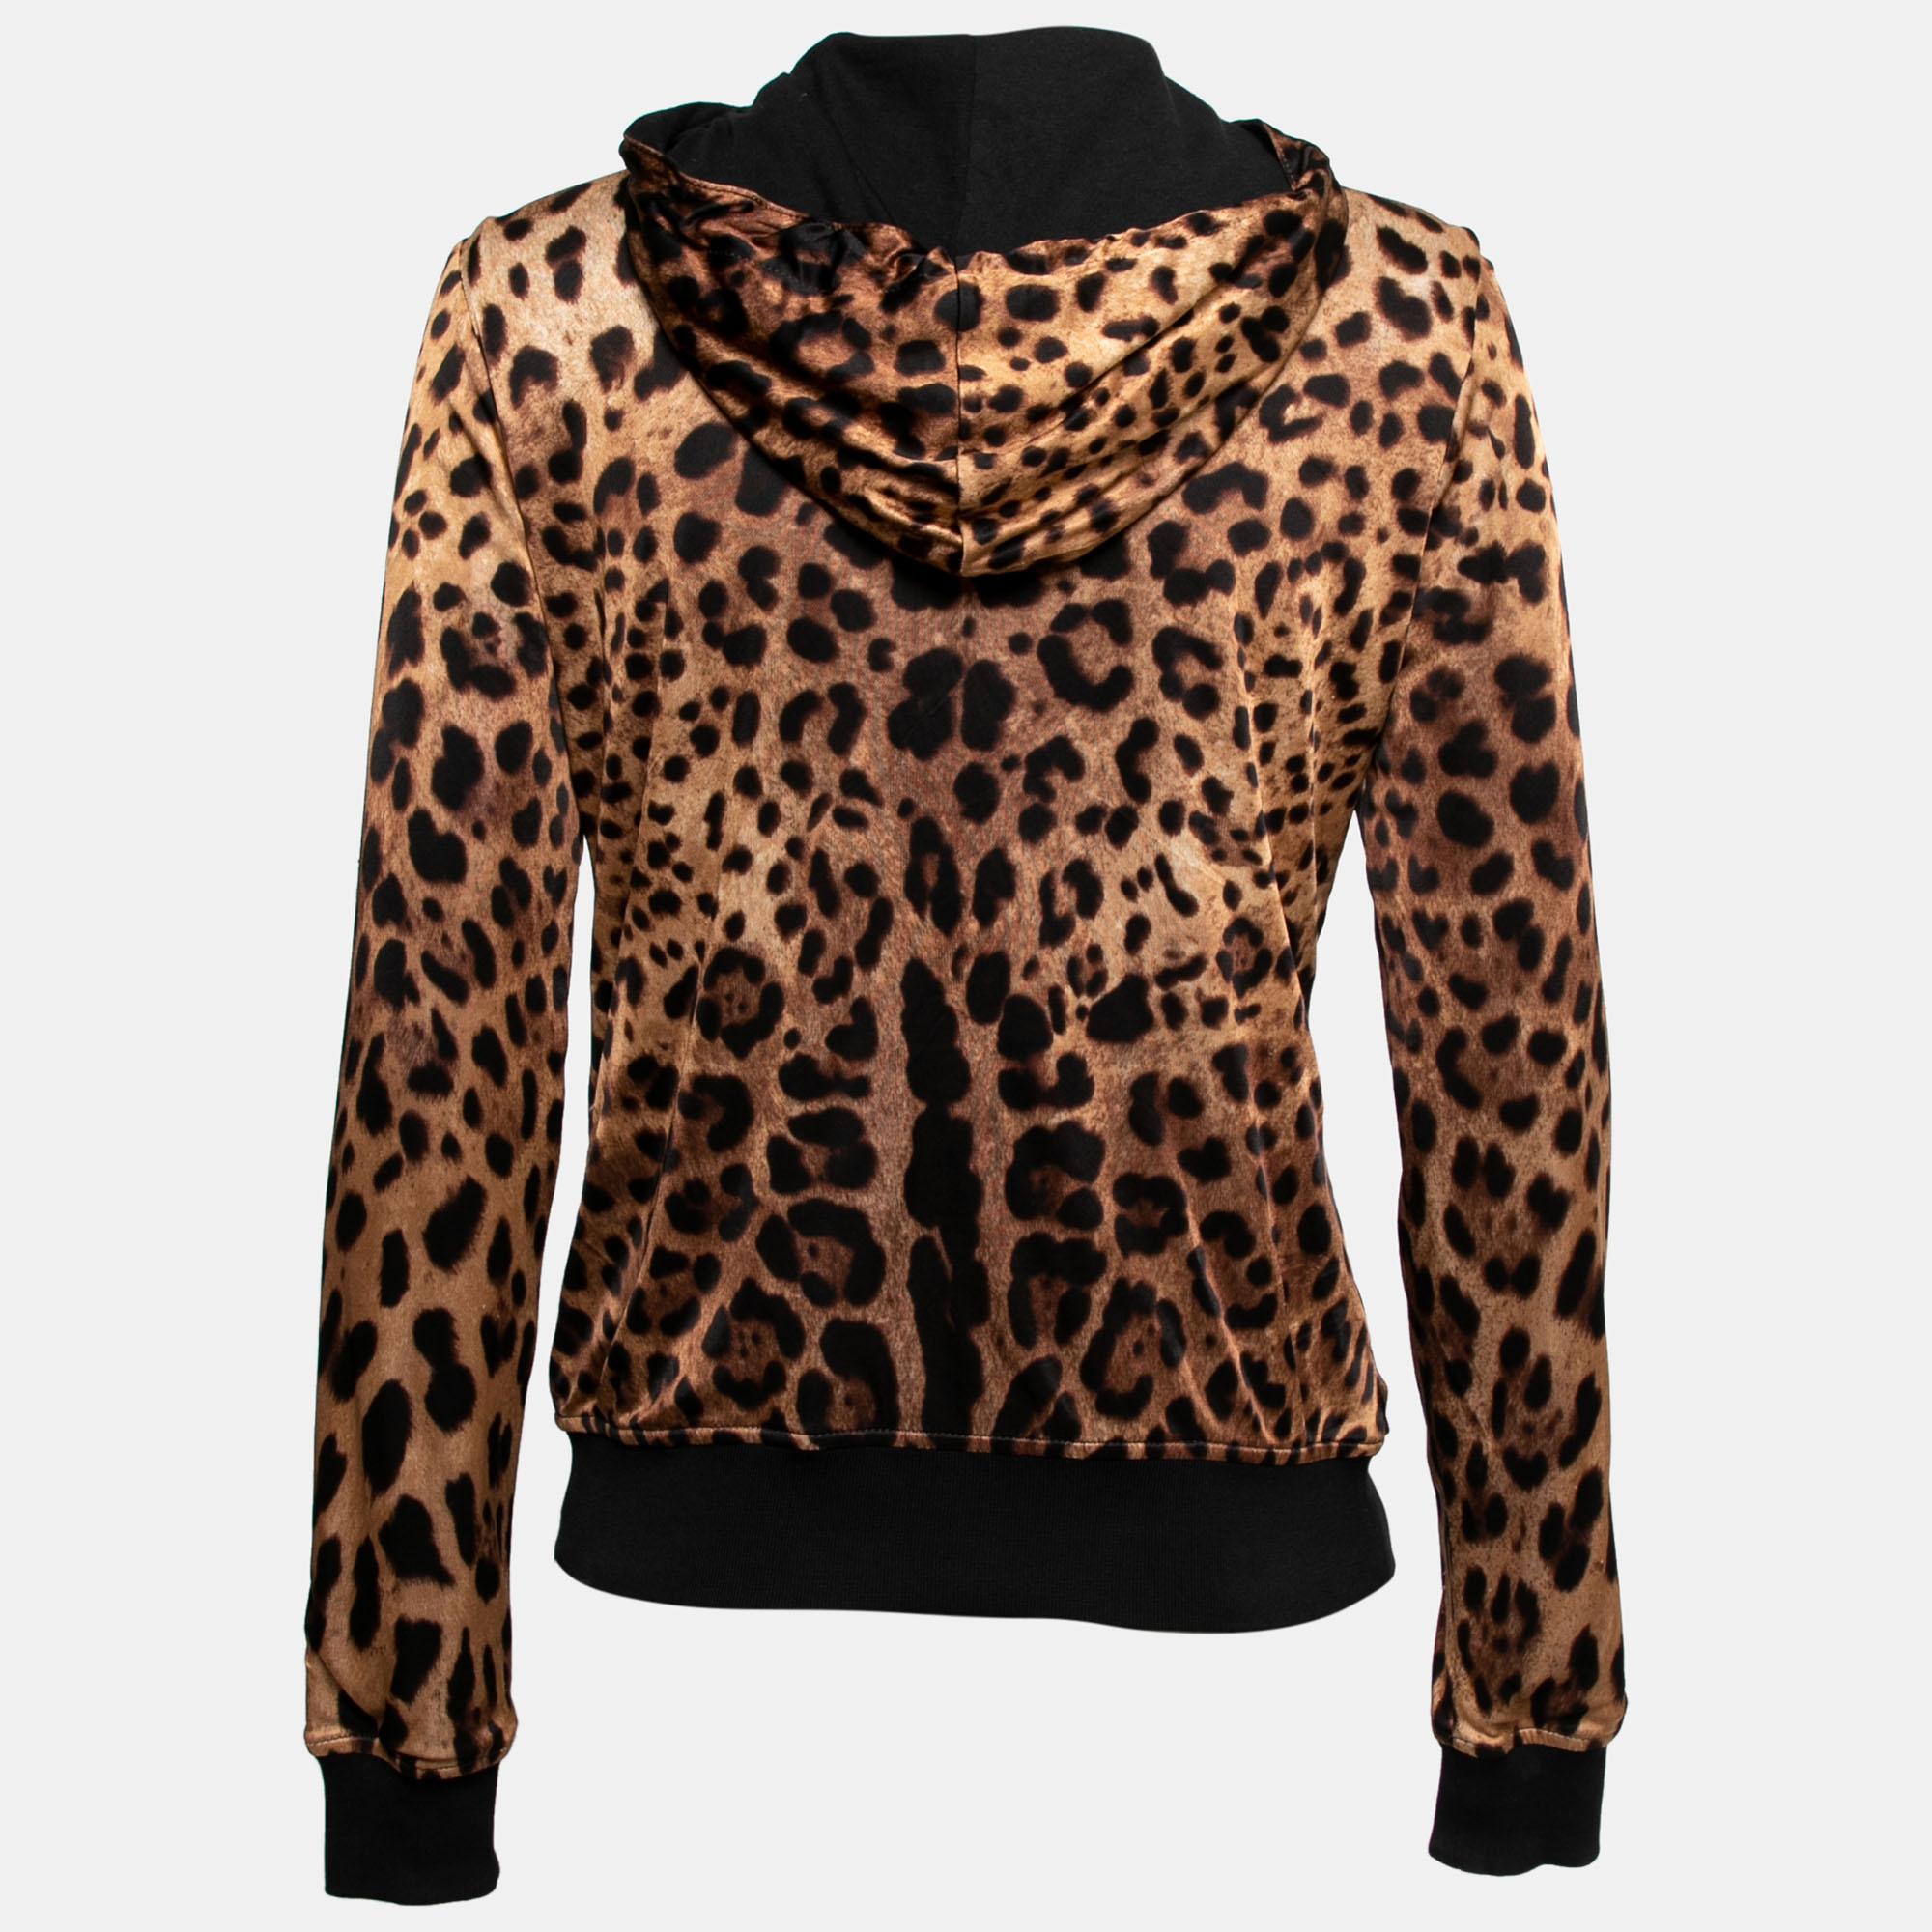 Update your luxury wardrobe with this hoodie from the House of Dolce & Gabbana. It is fashioned in brown leopard-printed jersey fabric and flaunts a zip-front fastening, a logo detail on the front, and long sleeves. Add panache to your winter outfit